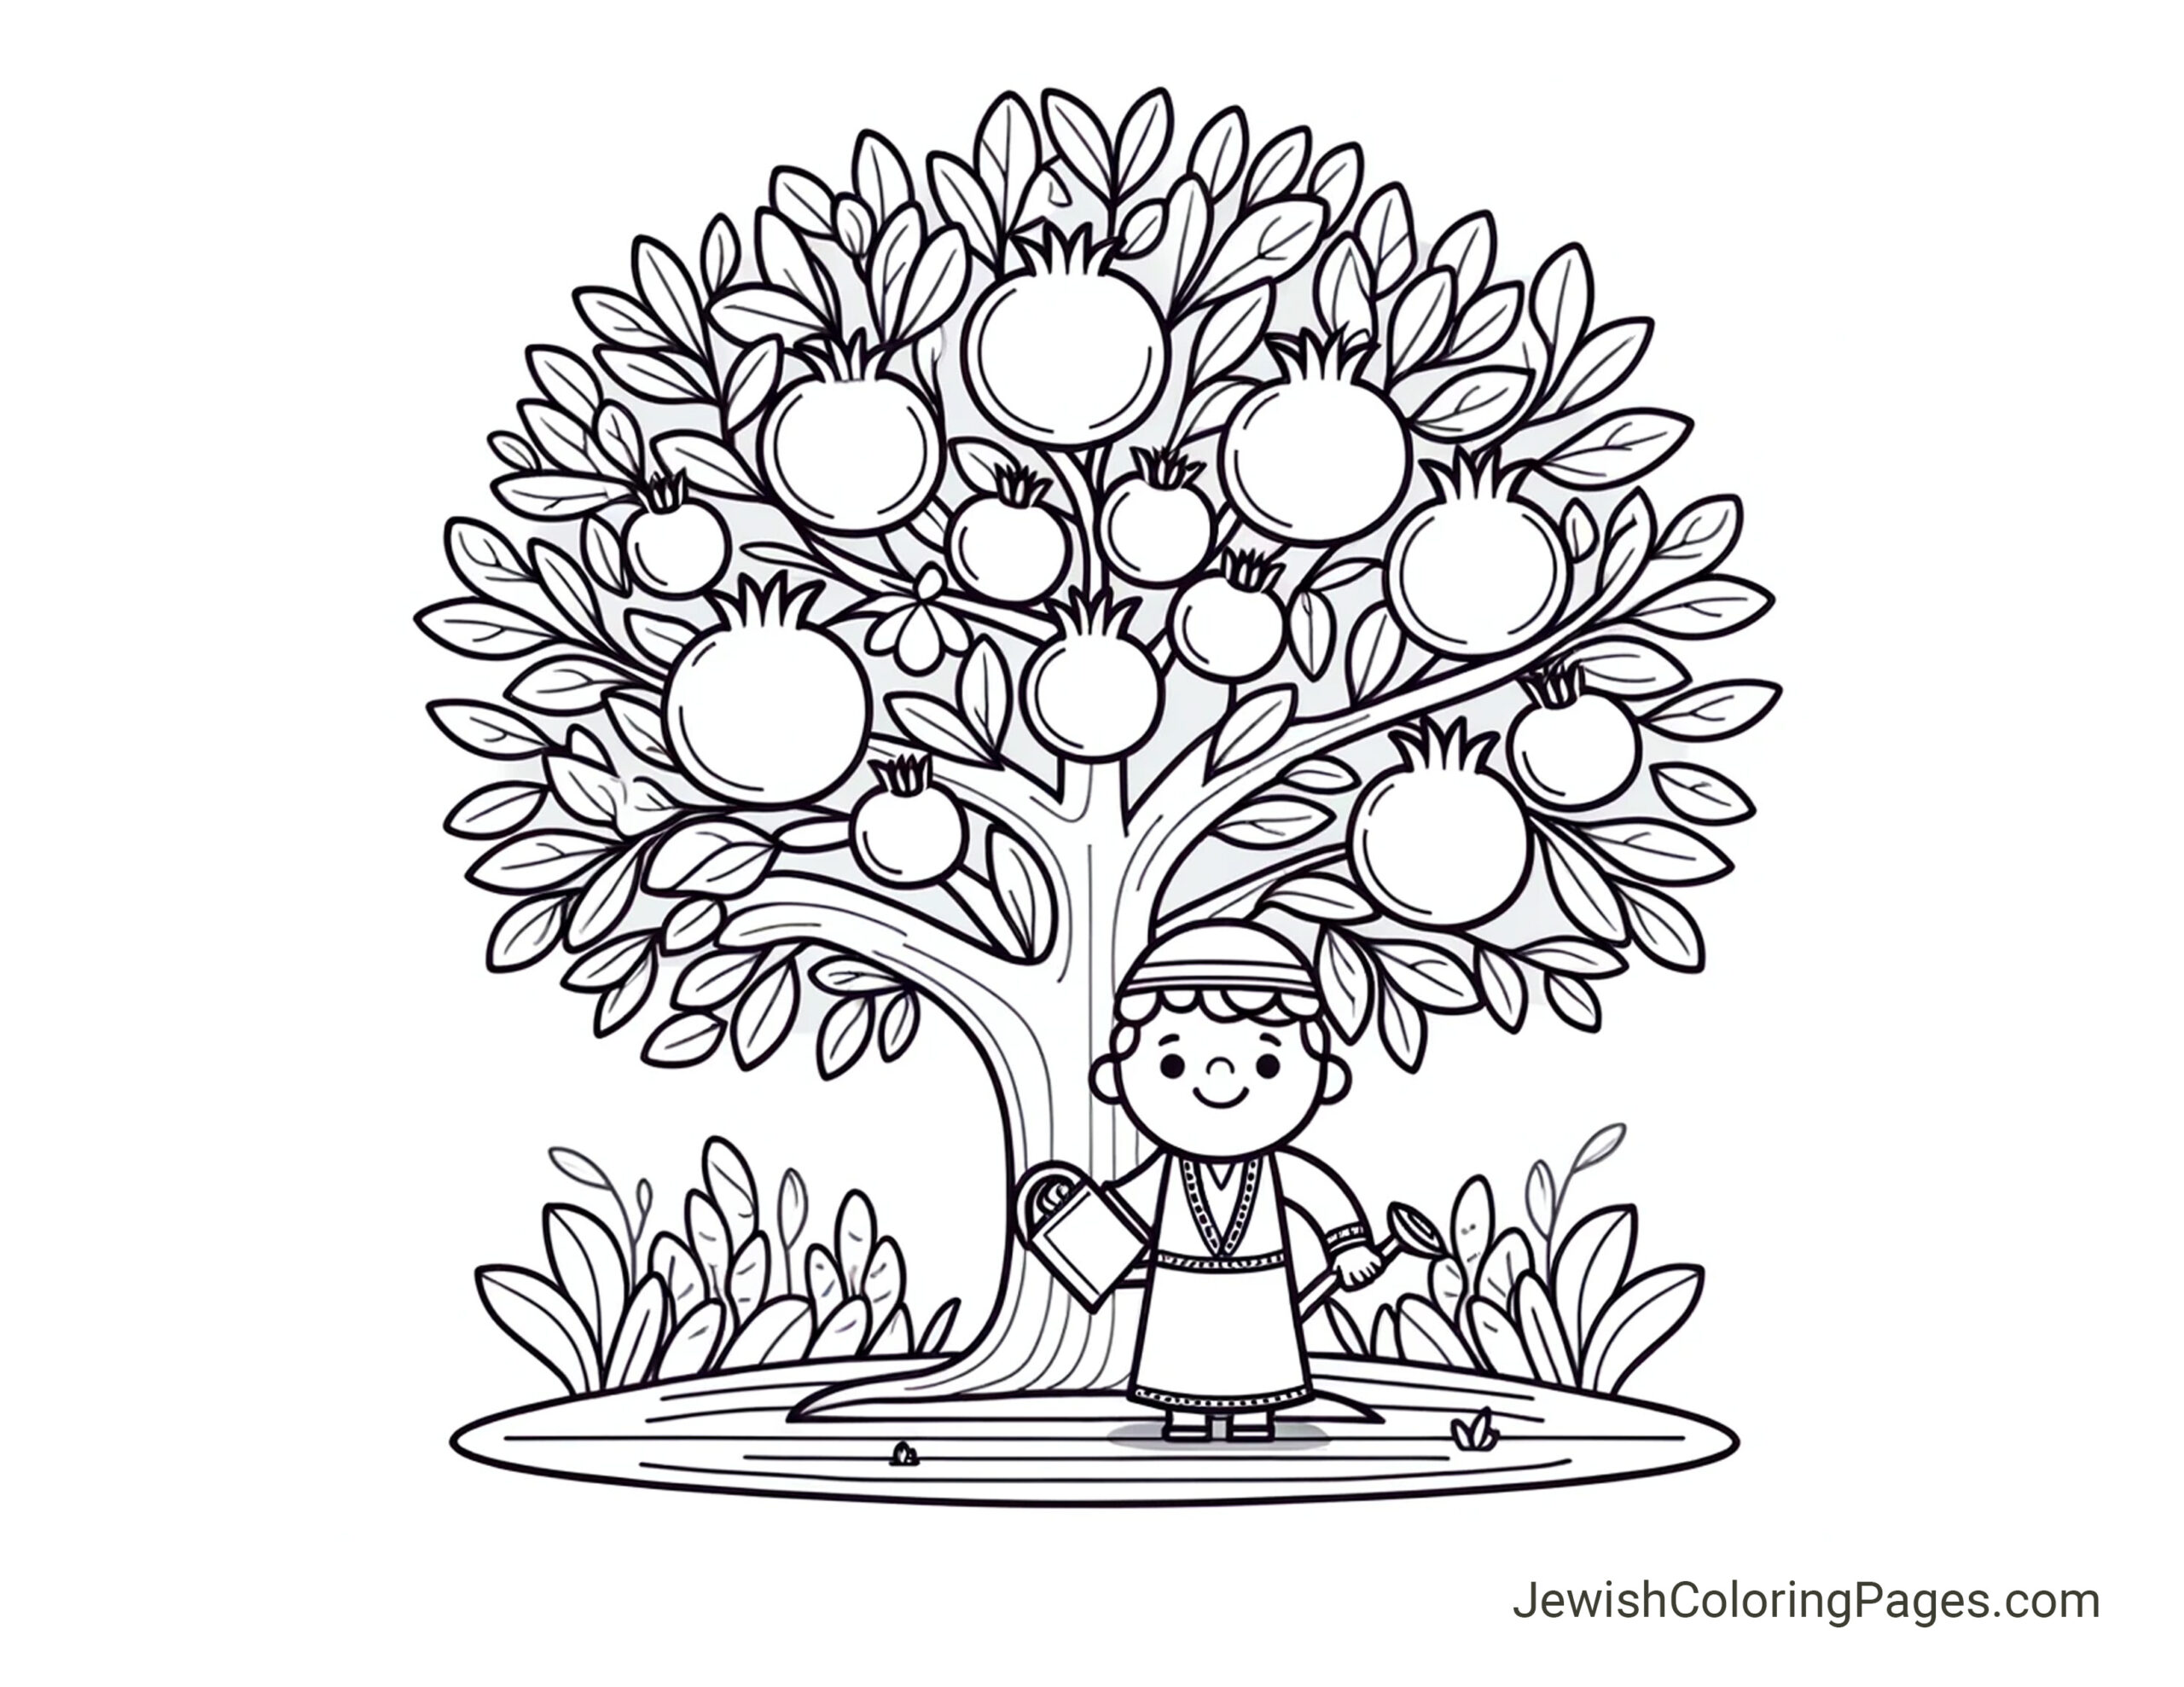 Tu Bishvat coloring page with a pomegranate tree and a child